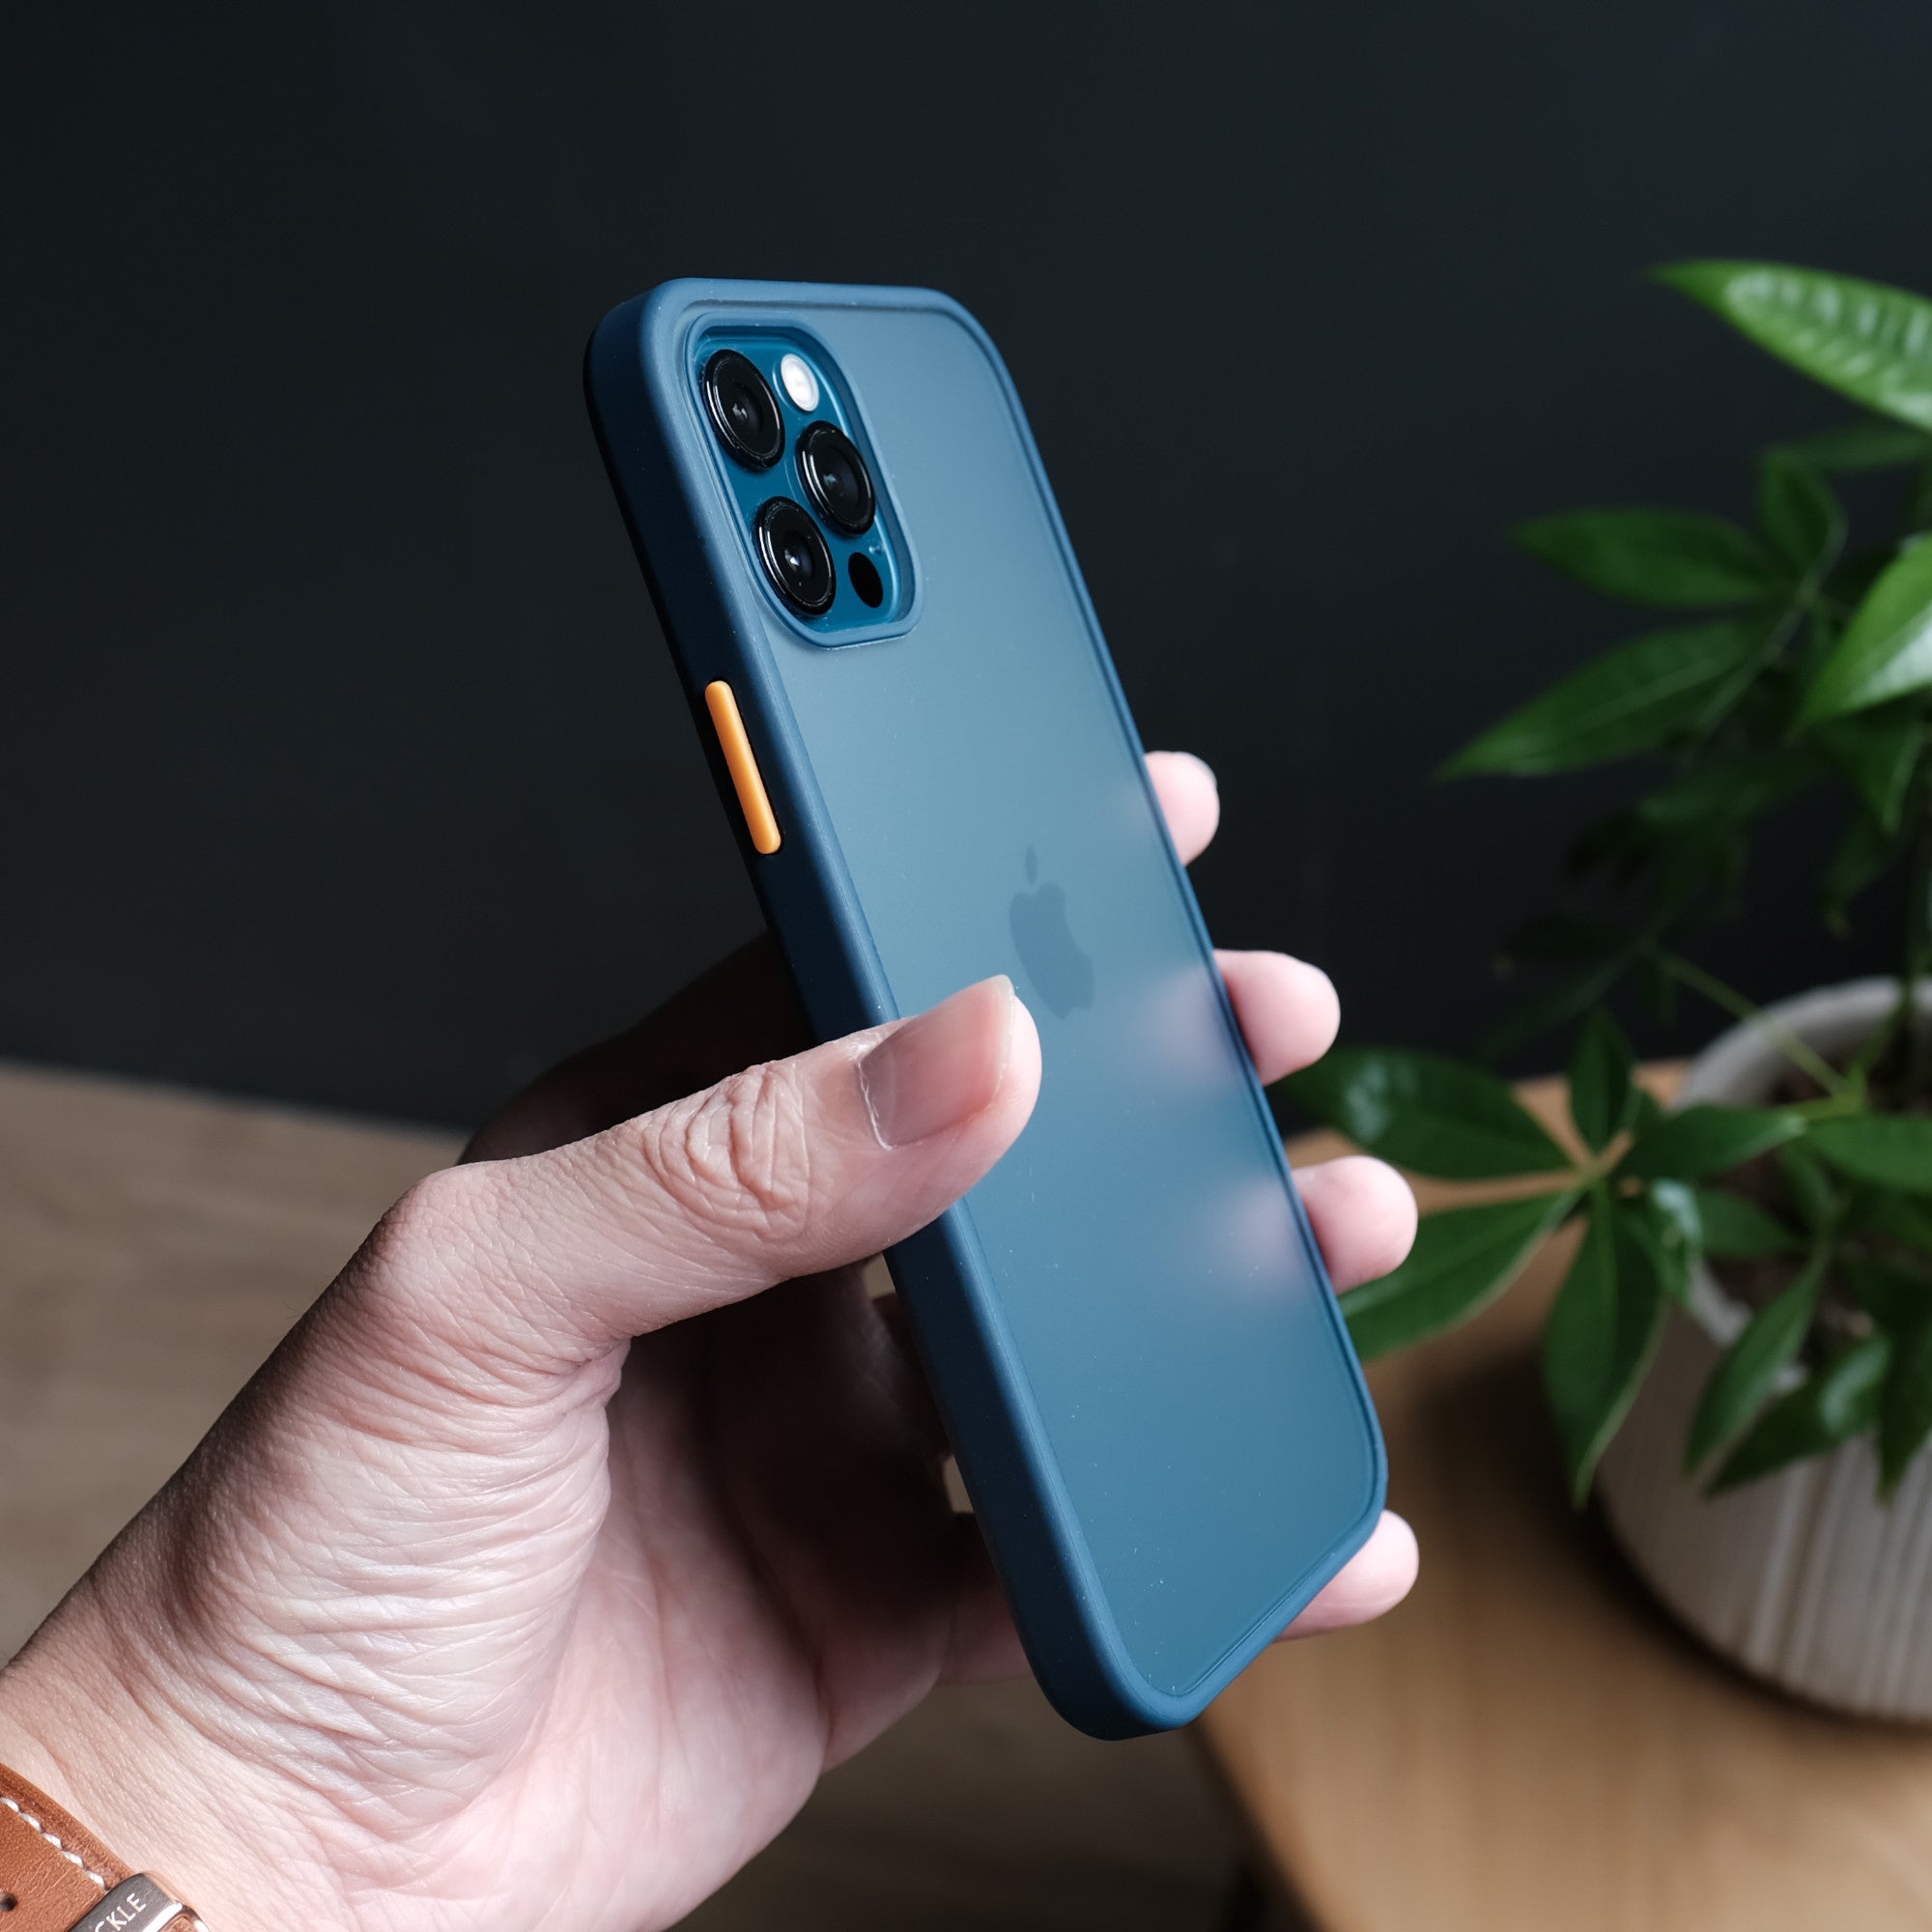 Bare Armour - Minimalist Shock Resistant Case for iPhone 12 Pro and iPhone 12 Pro Max - Thin and Sleek